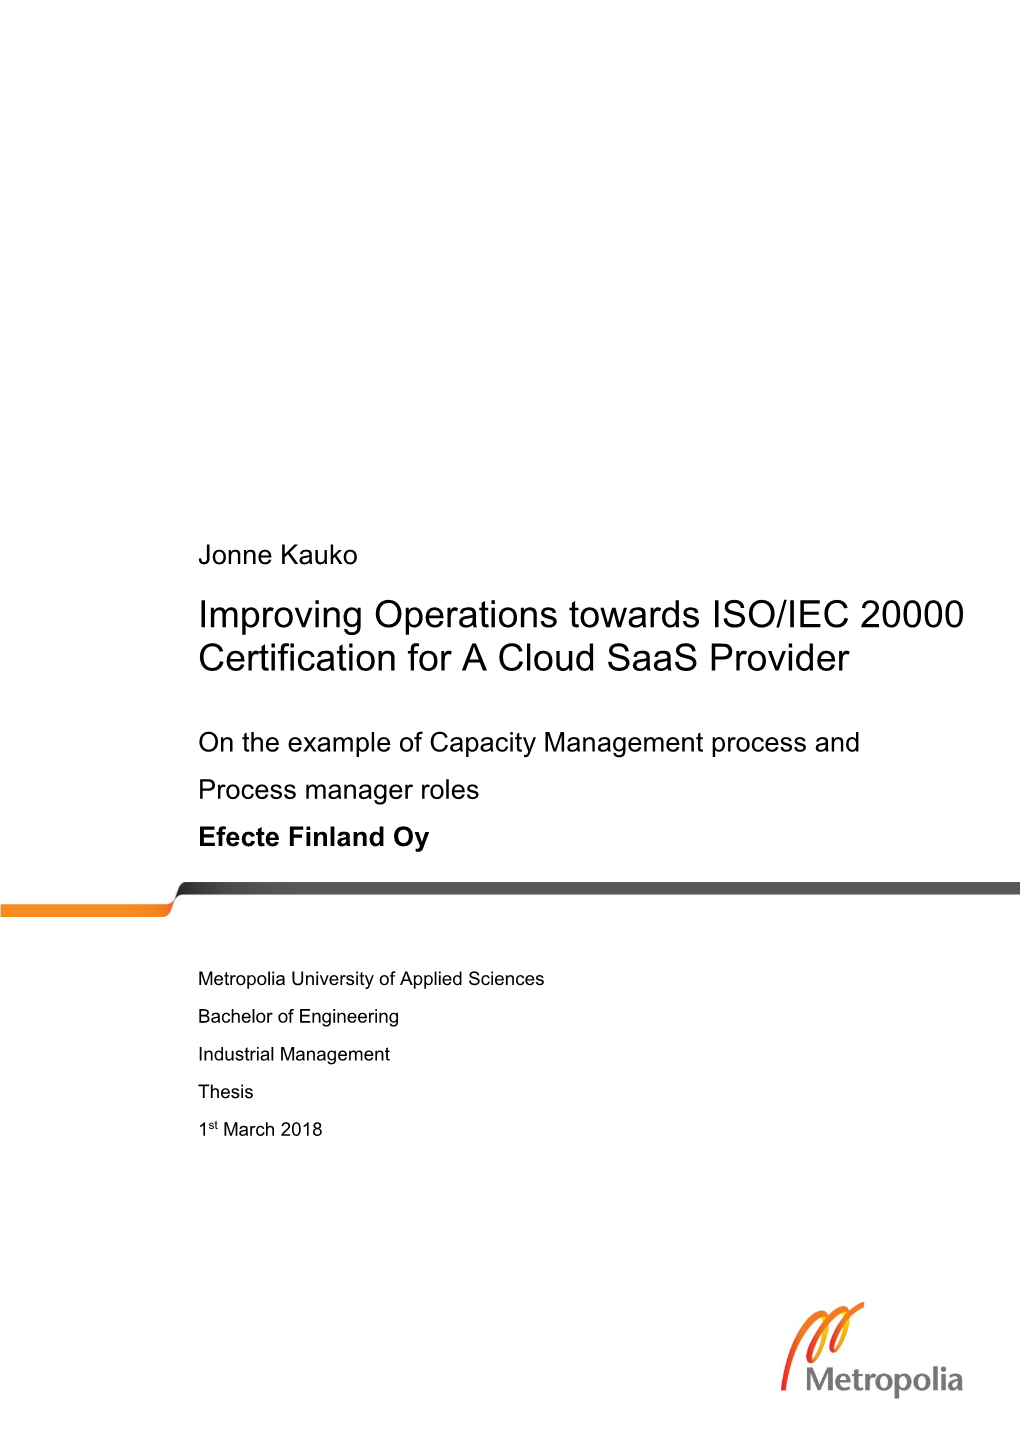 Improving Operations Towards ISO/IEC 20000 Certification for a Cloud Saas Provider